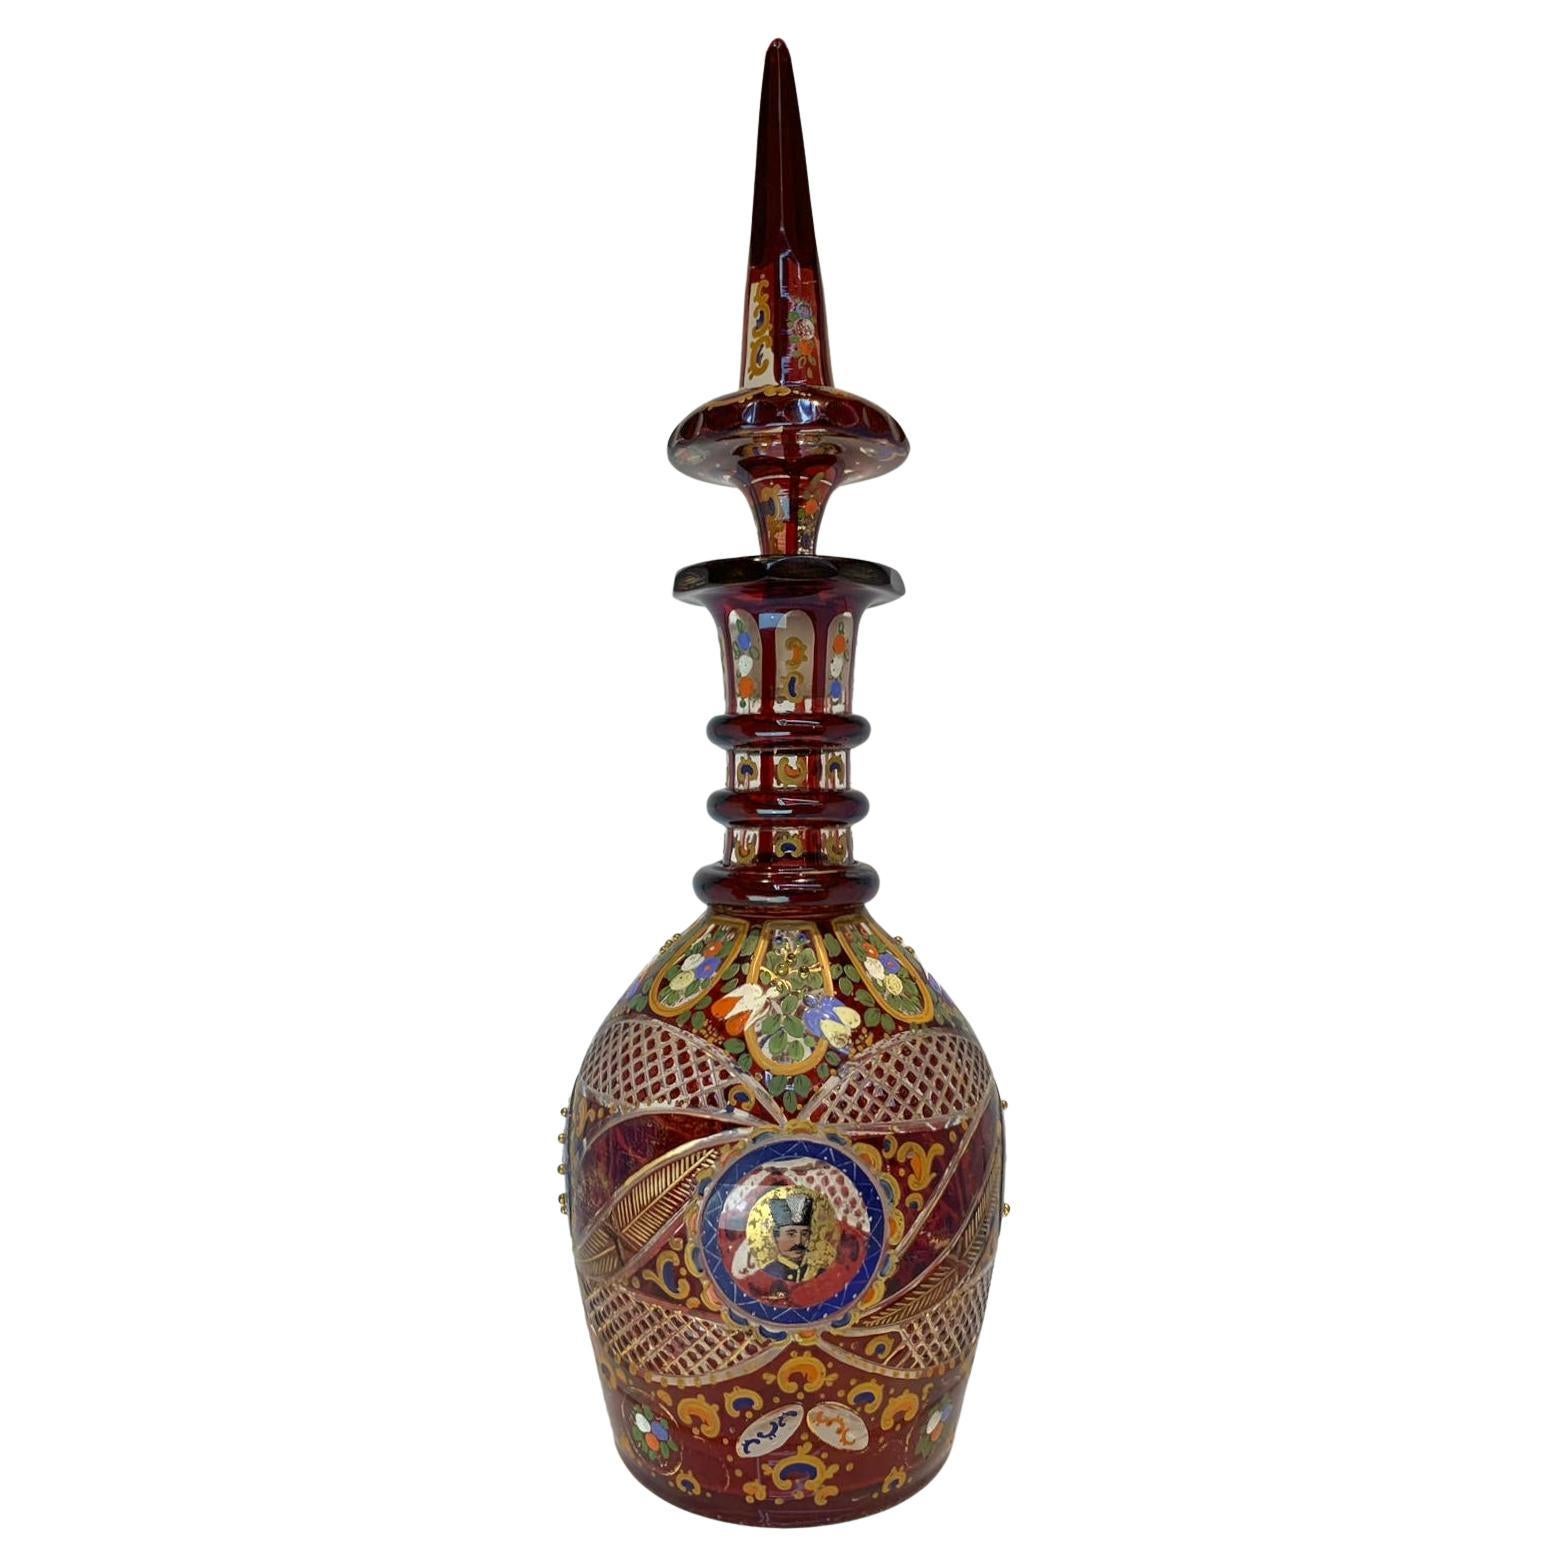 LARGE ENAMELLED GUT GLASS DECANTER
BOHEMIAN FOR THE PERSIAN MARKET

Enamelled with scrolls and bouquets and heightened in gilt
Decorated with glass beads
The sides with two royal portraits of an Iranian Shah

Height 53 cm